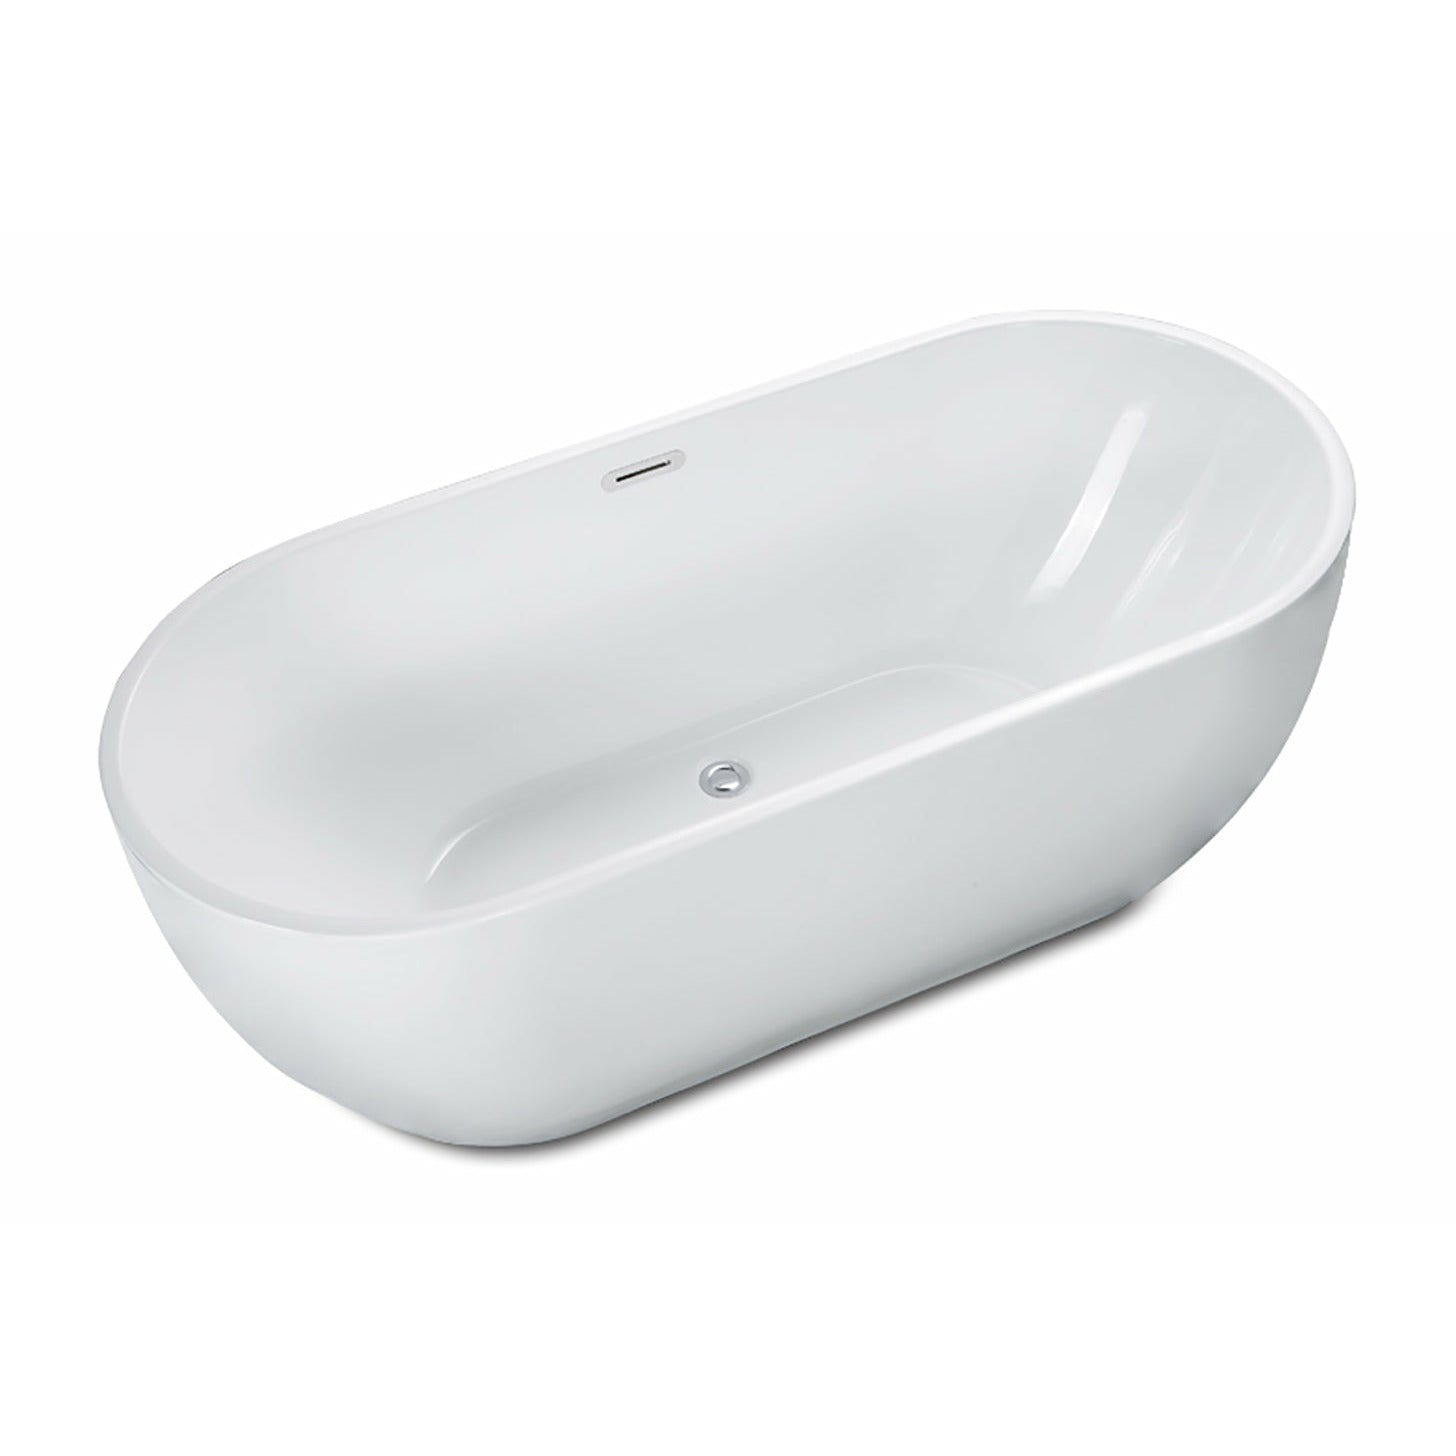 ALFI AB8838 59 inch White Oval Acrylic Free Standing Soaking Bathtub with polished chrome and drain in a white background, 1 person capacity, front view